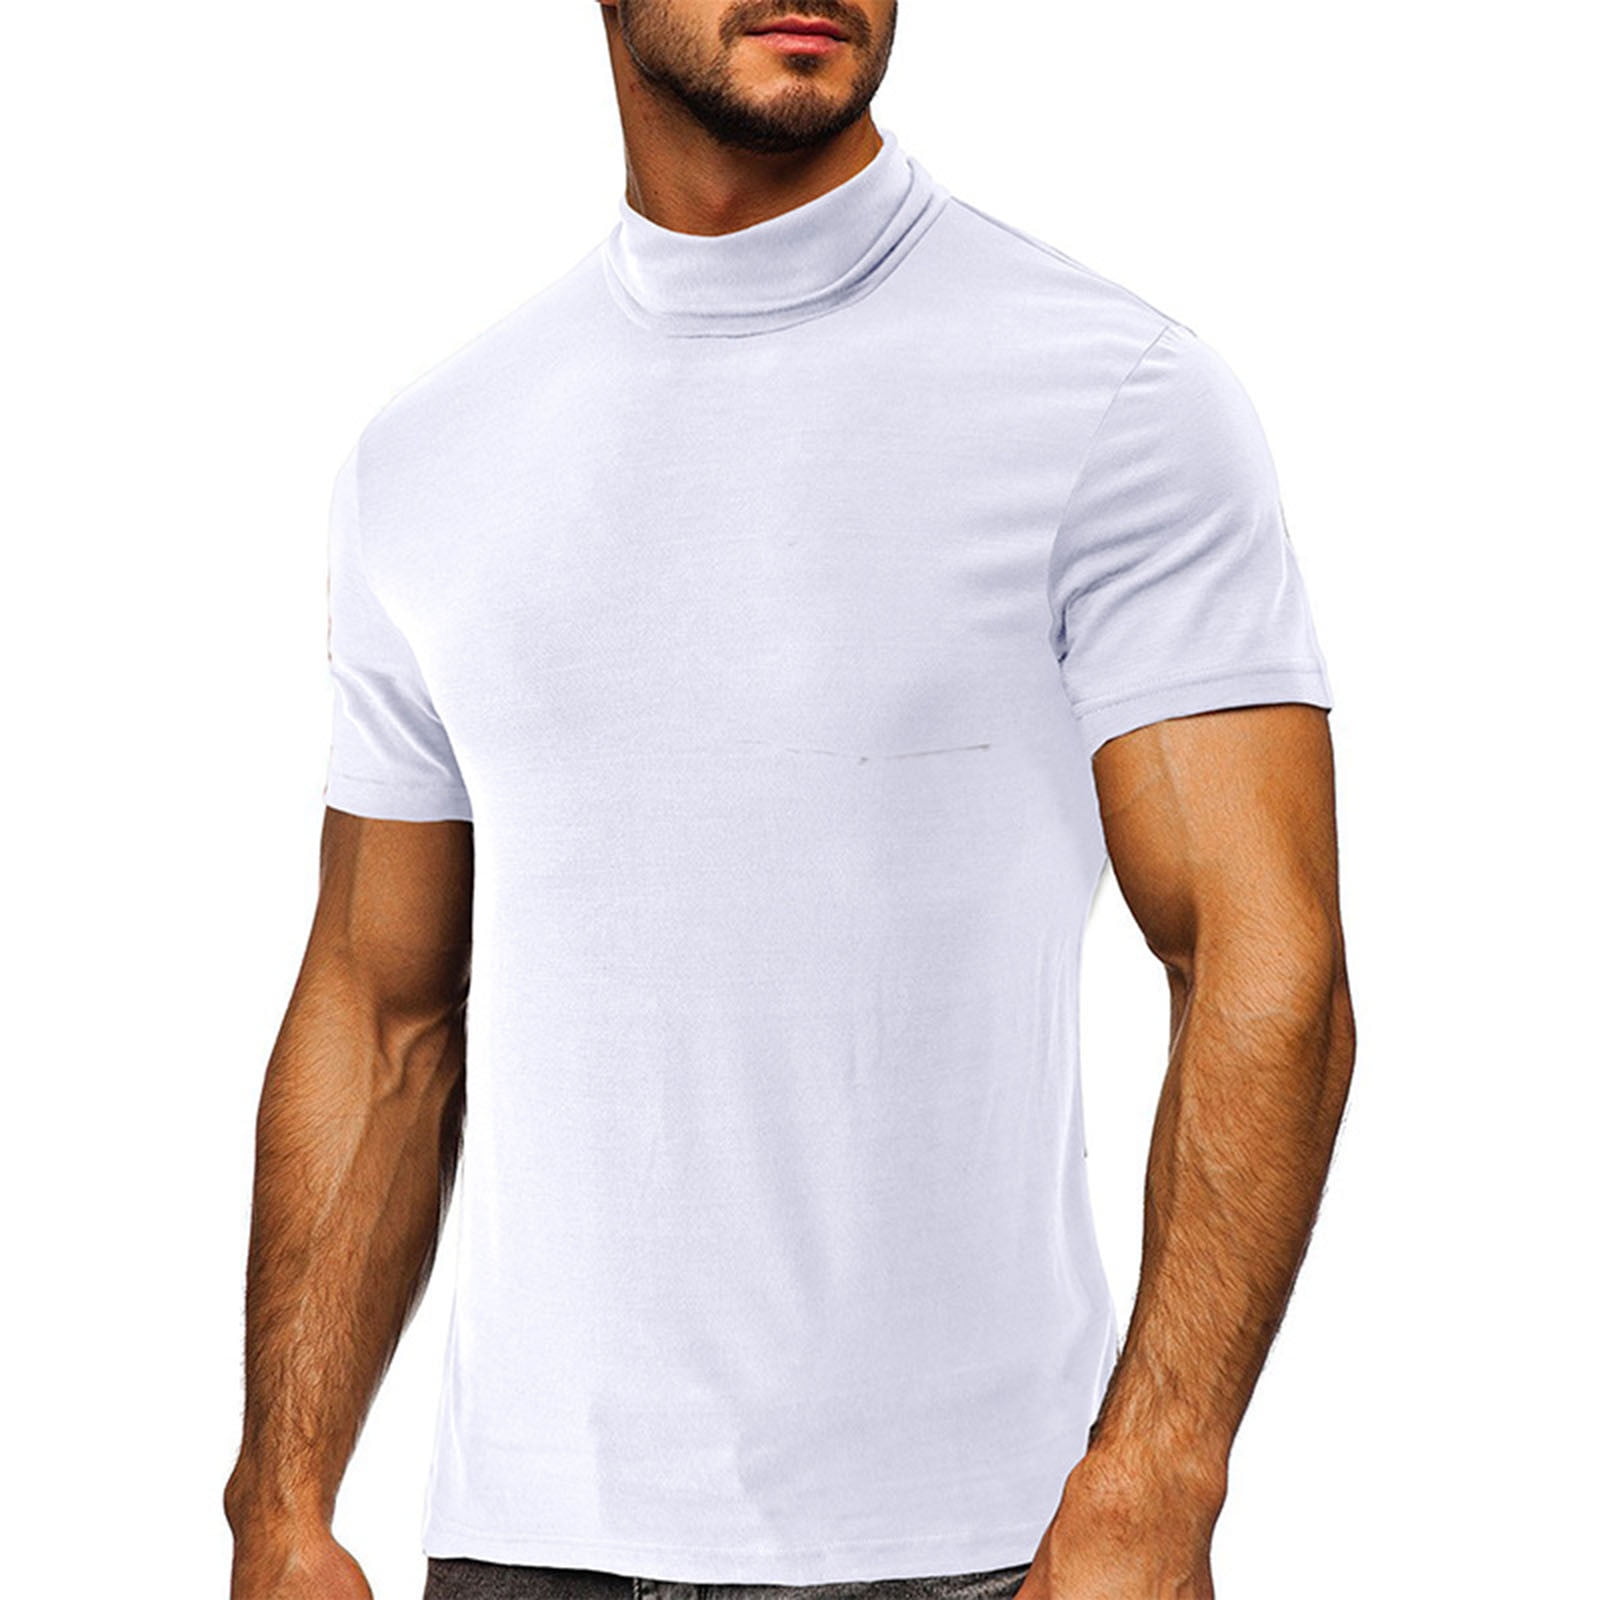 YYDGH Mens Mock Turtleneck T Shirts Short Sleeve Solid Color Shirts Basic  Slim Fit Pullover Tees White S